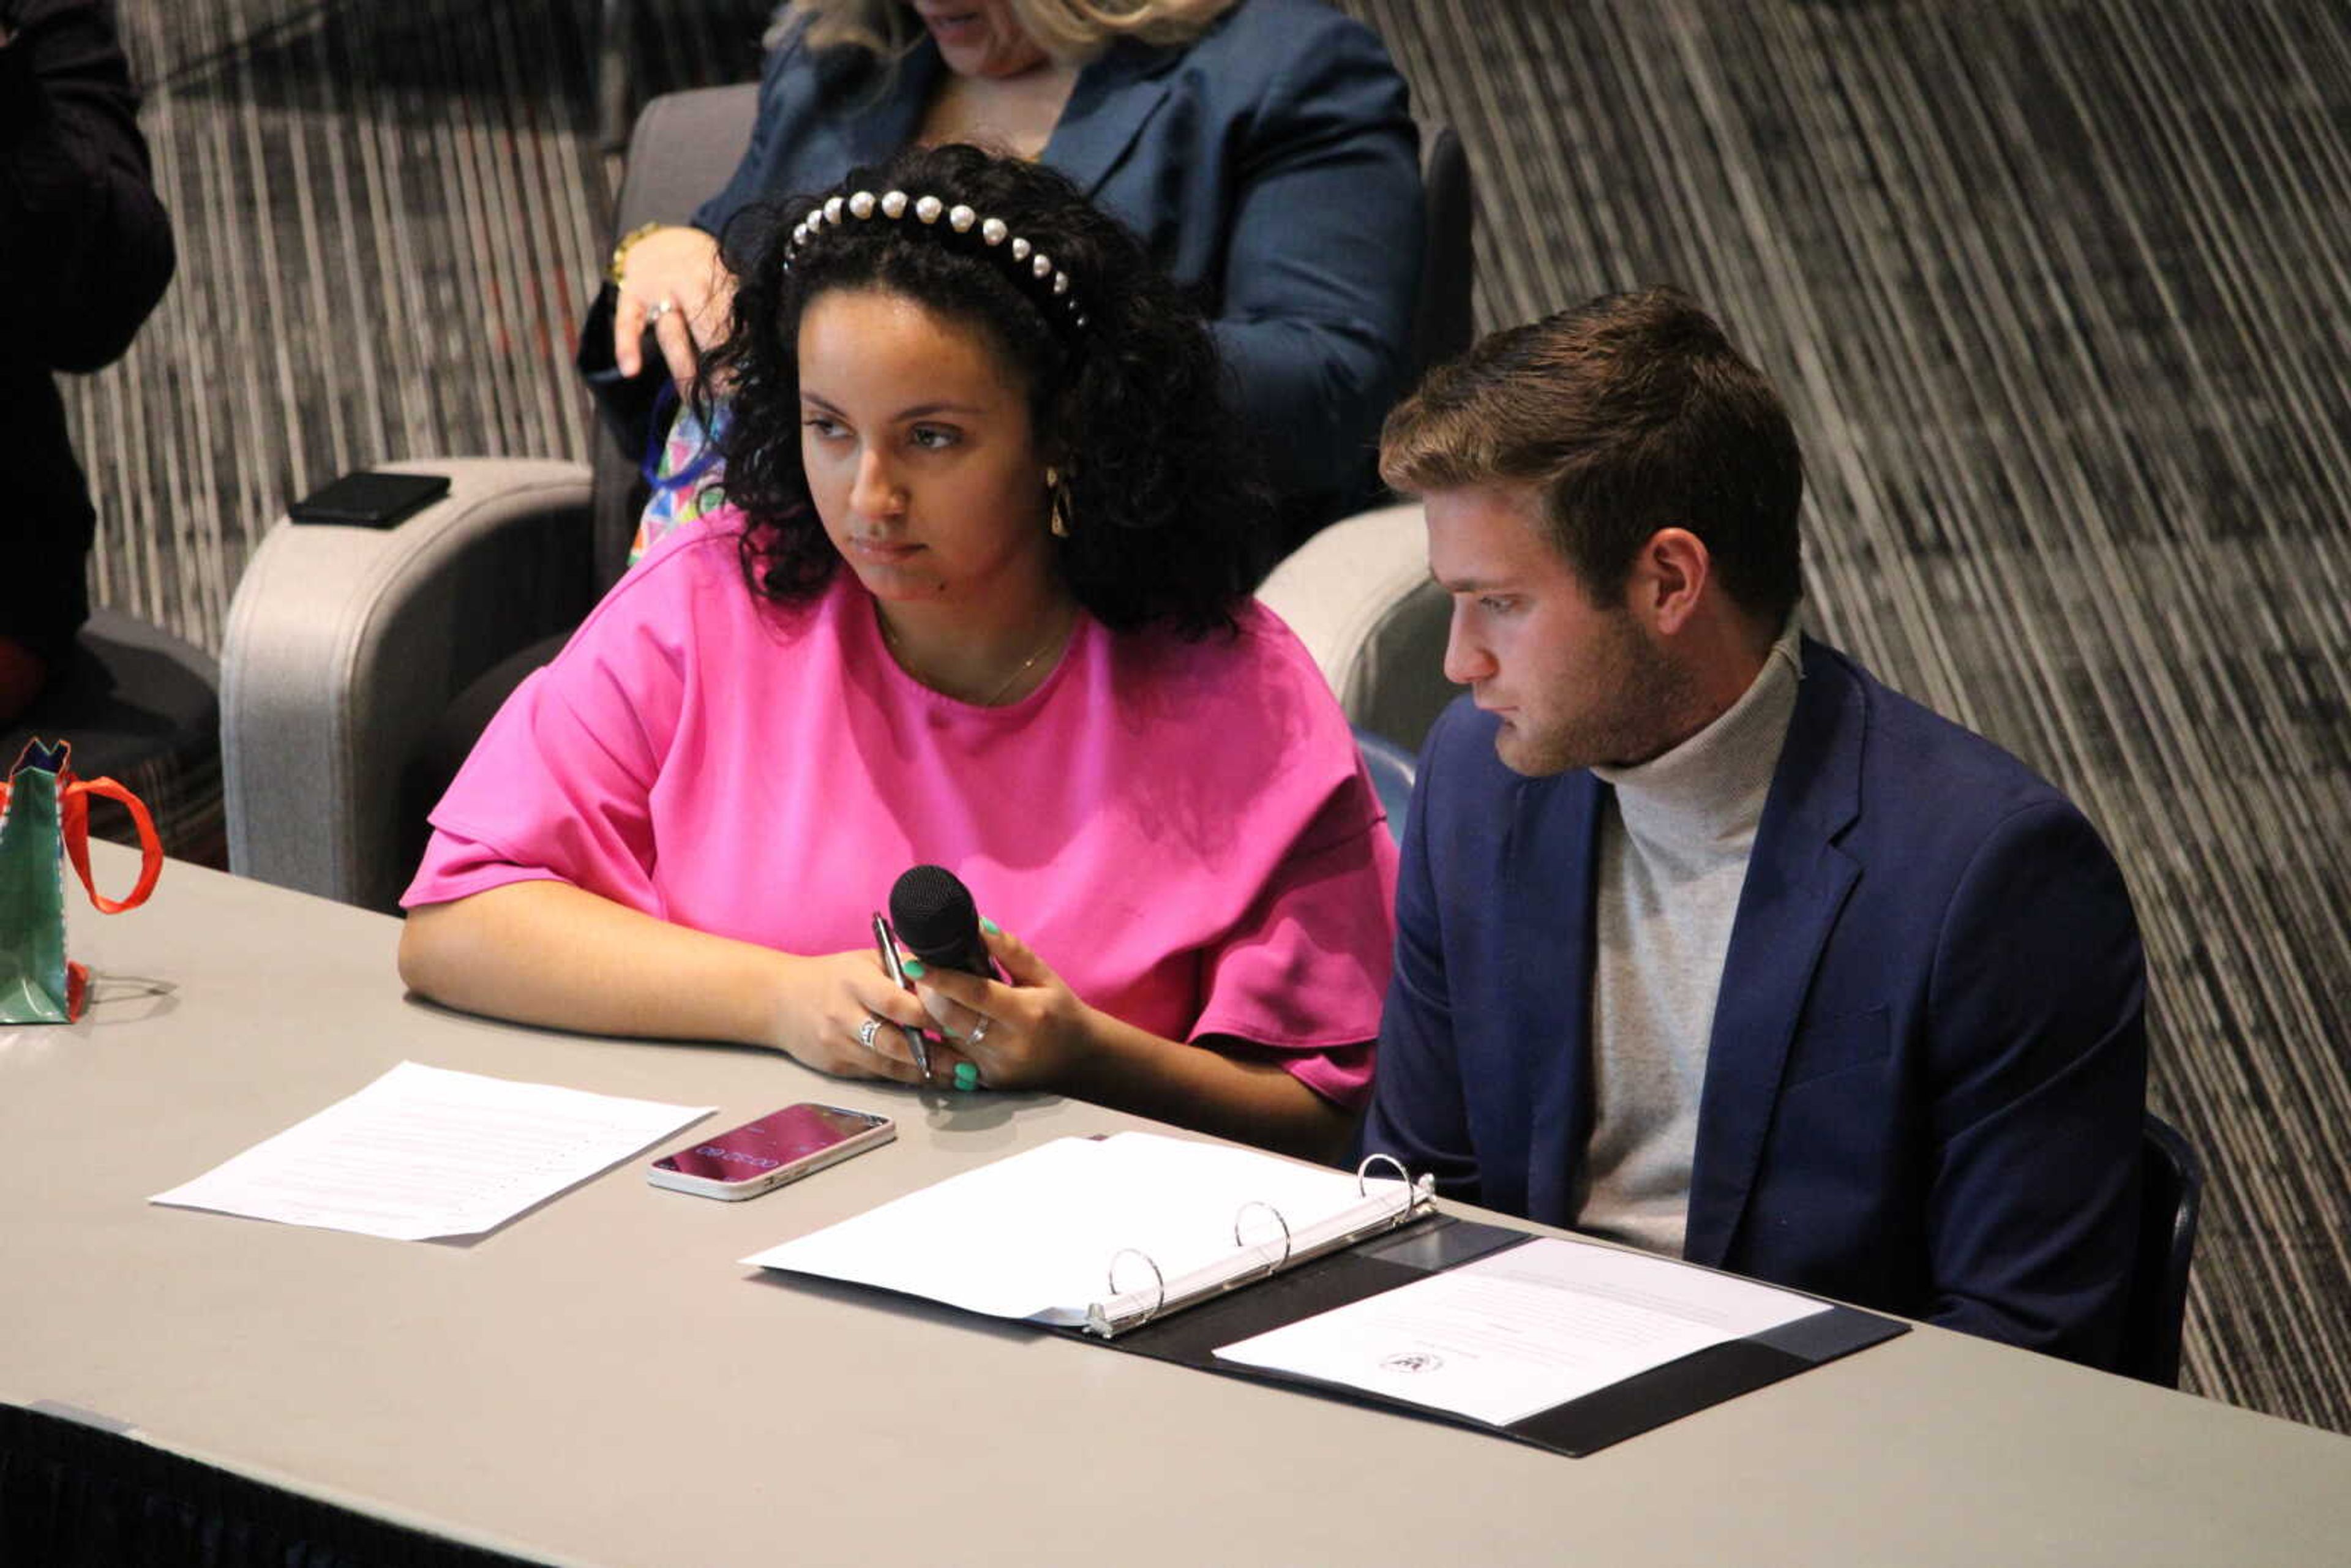 Current SGA president Layla Bouzihay [left] and vice president Nolan Knupp ask the 2022-23 SGA candidates questions at the debate on March 30.